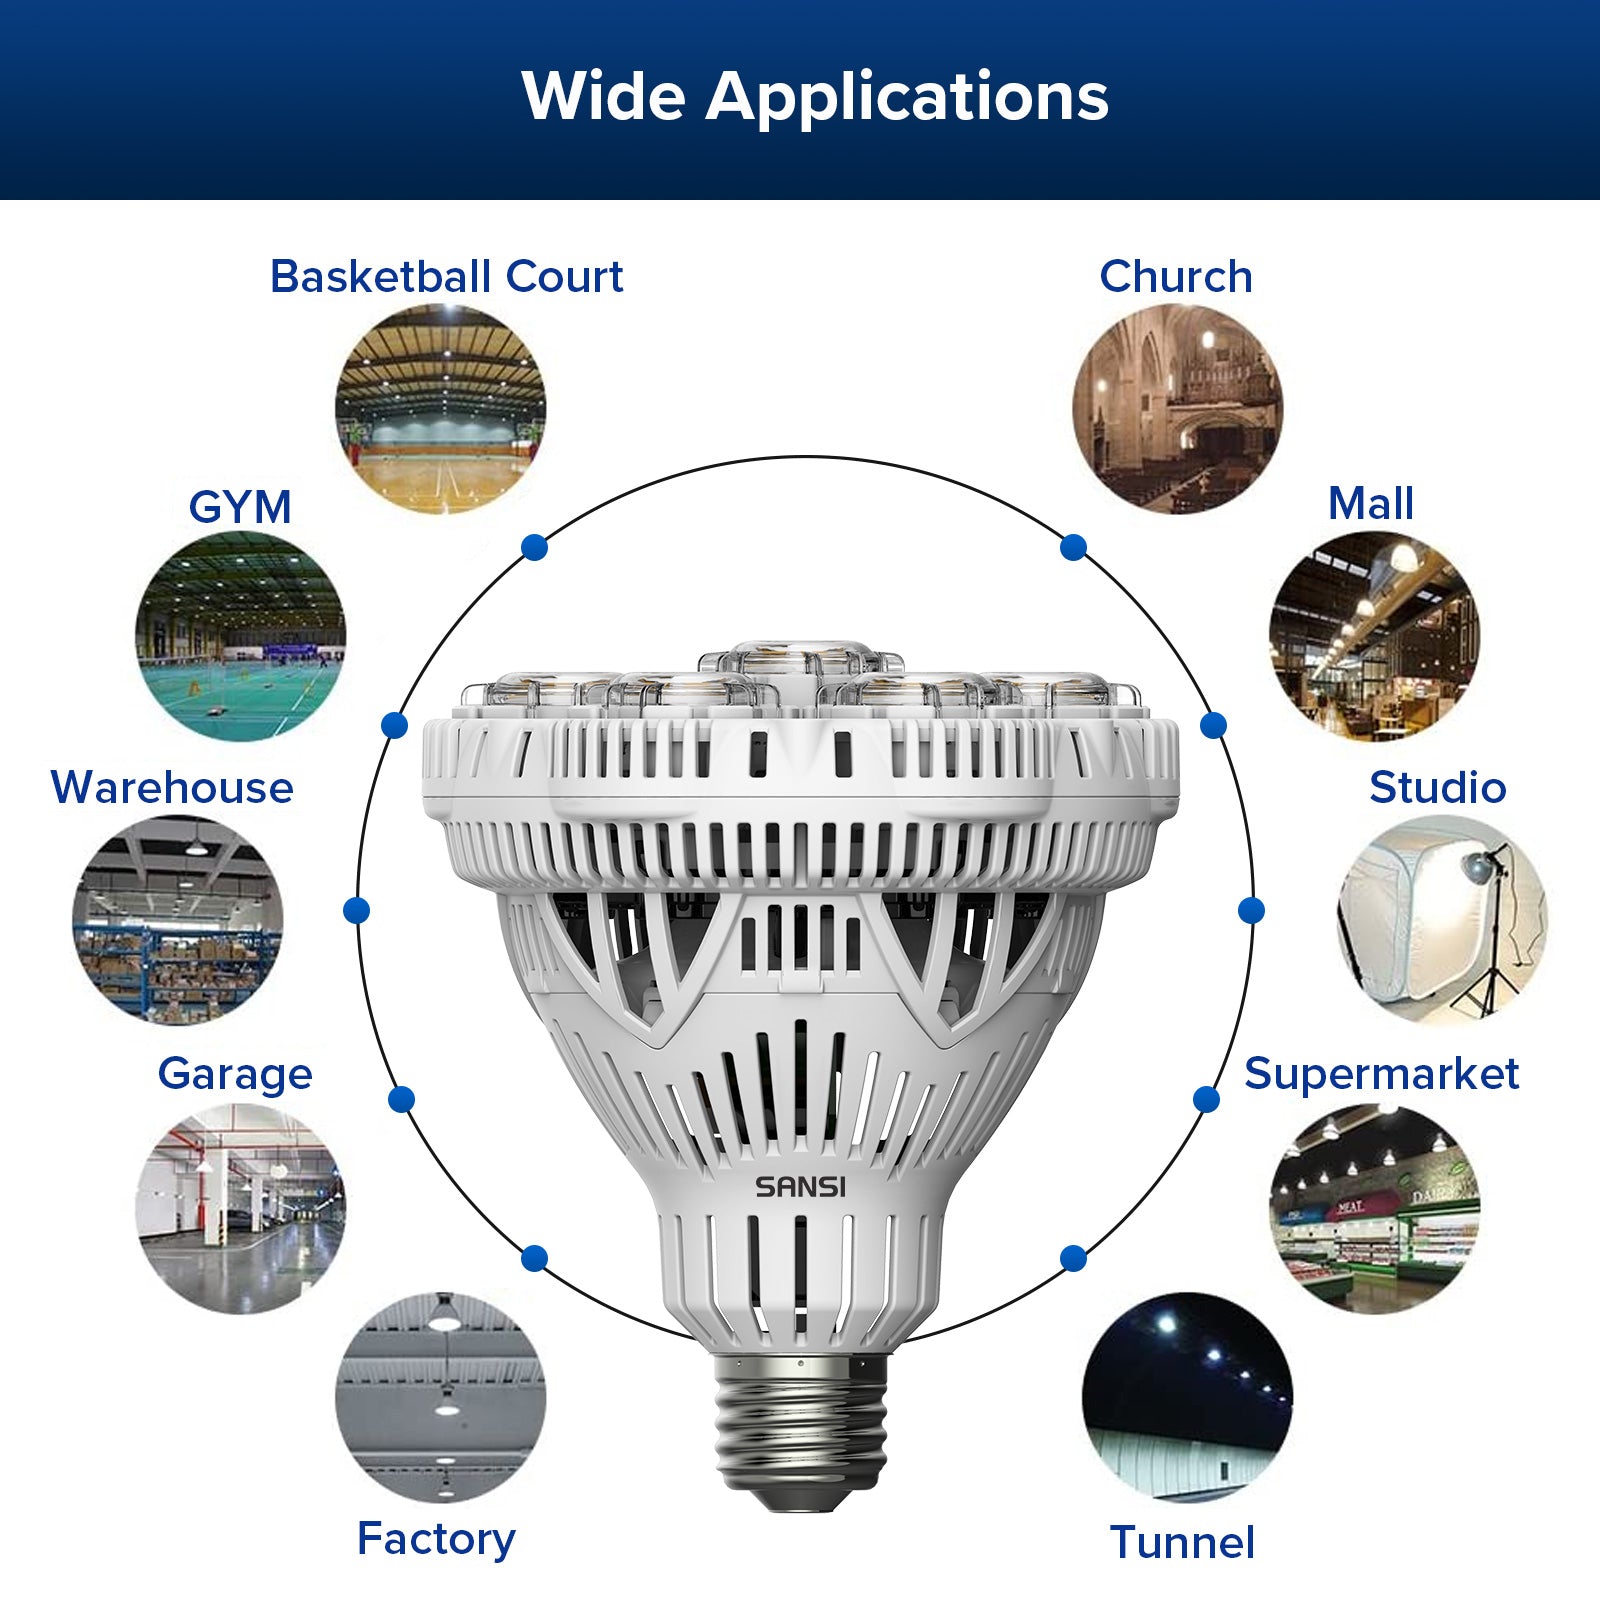 BR30 40W LED Light Bulb can be used in wide applications，basketball court、gym、warehouse、garage and so on.